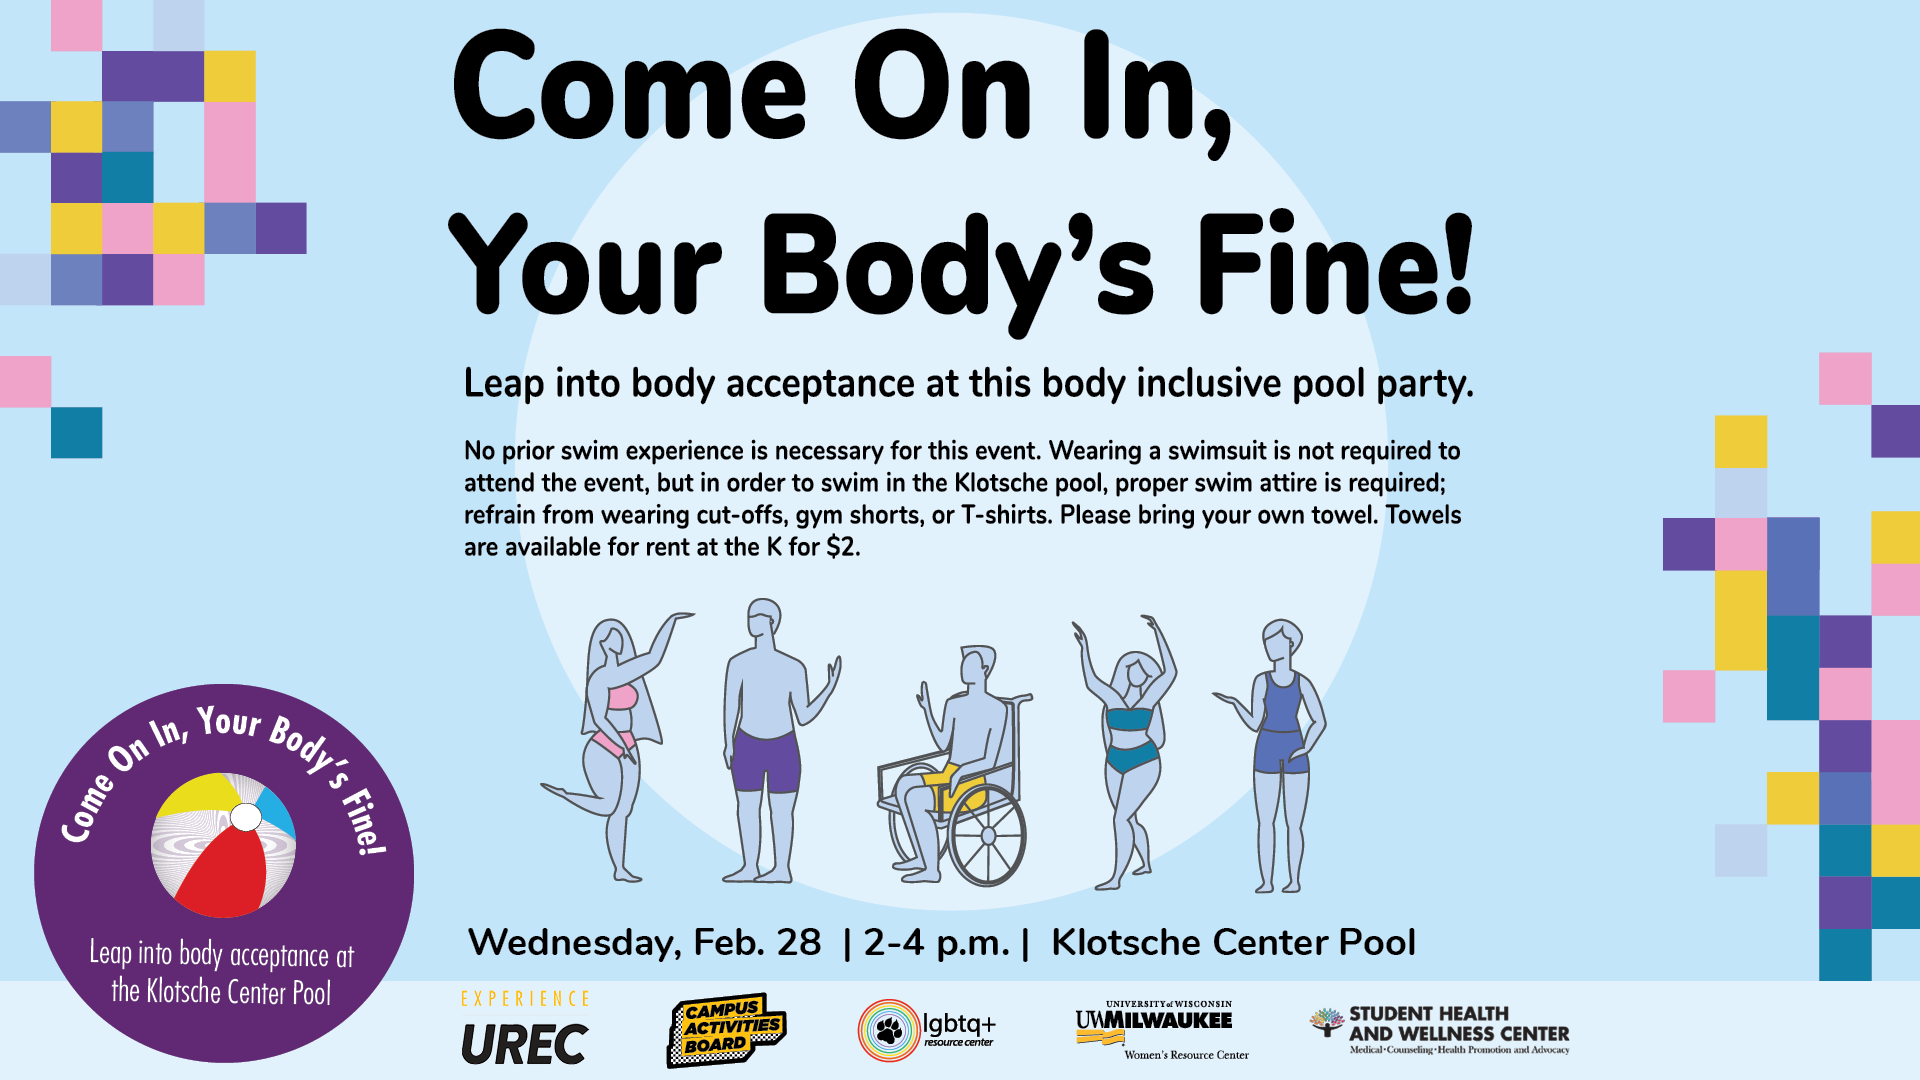 Come On In, Your Body's Fine! – Student Health and Wellness Center